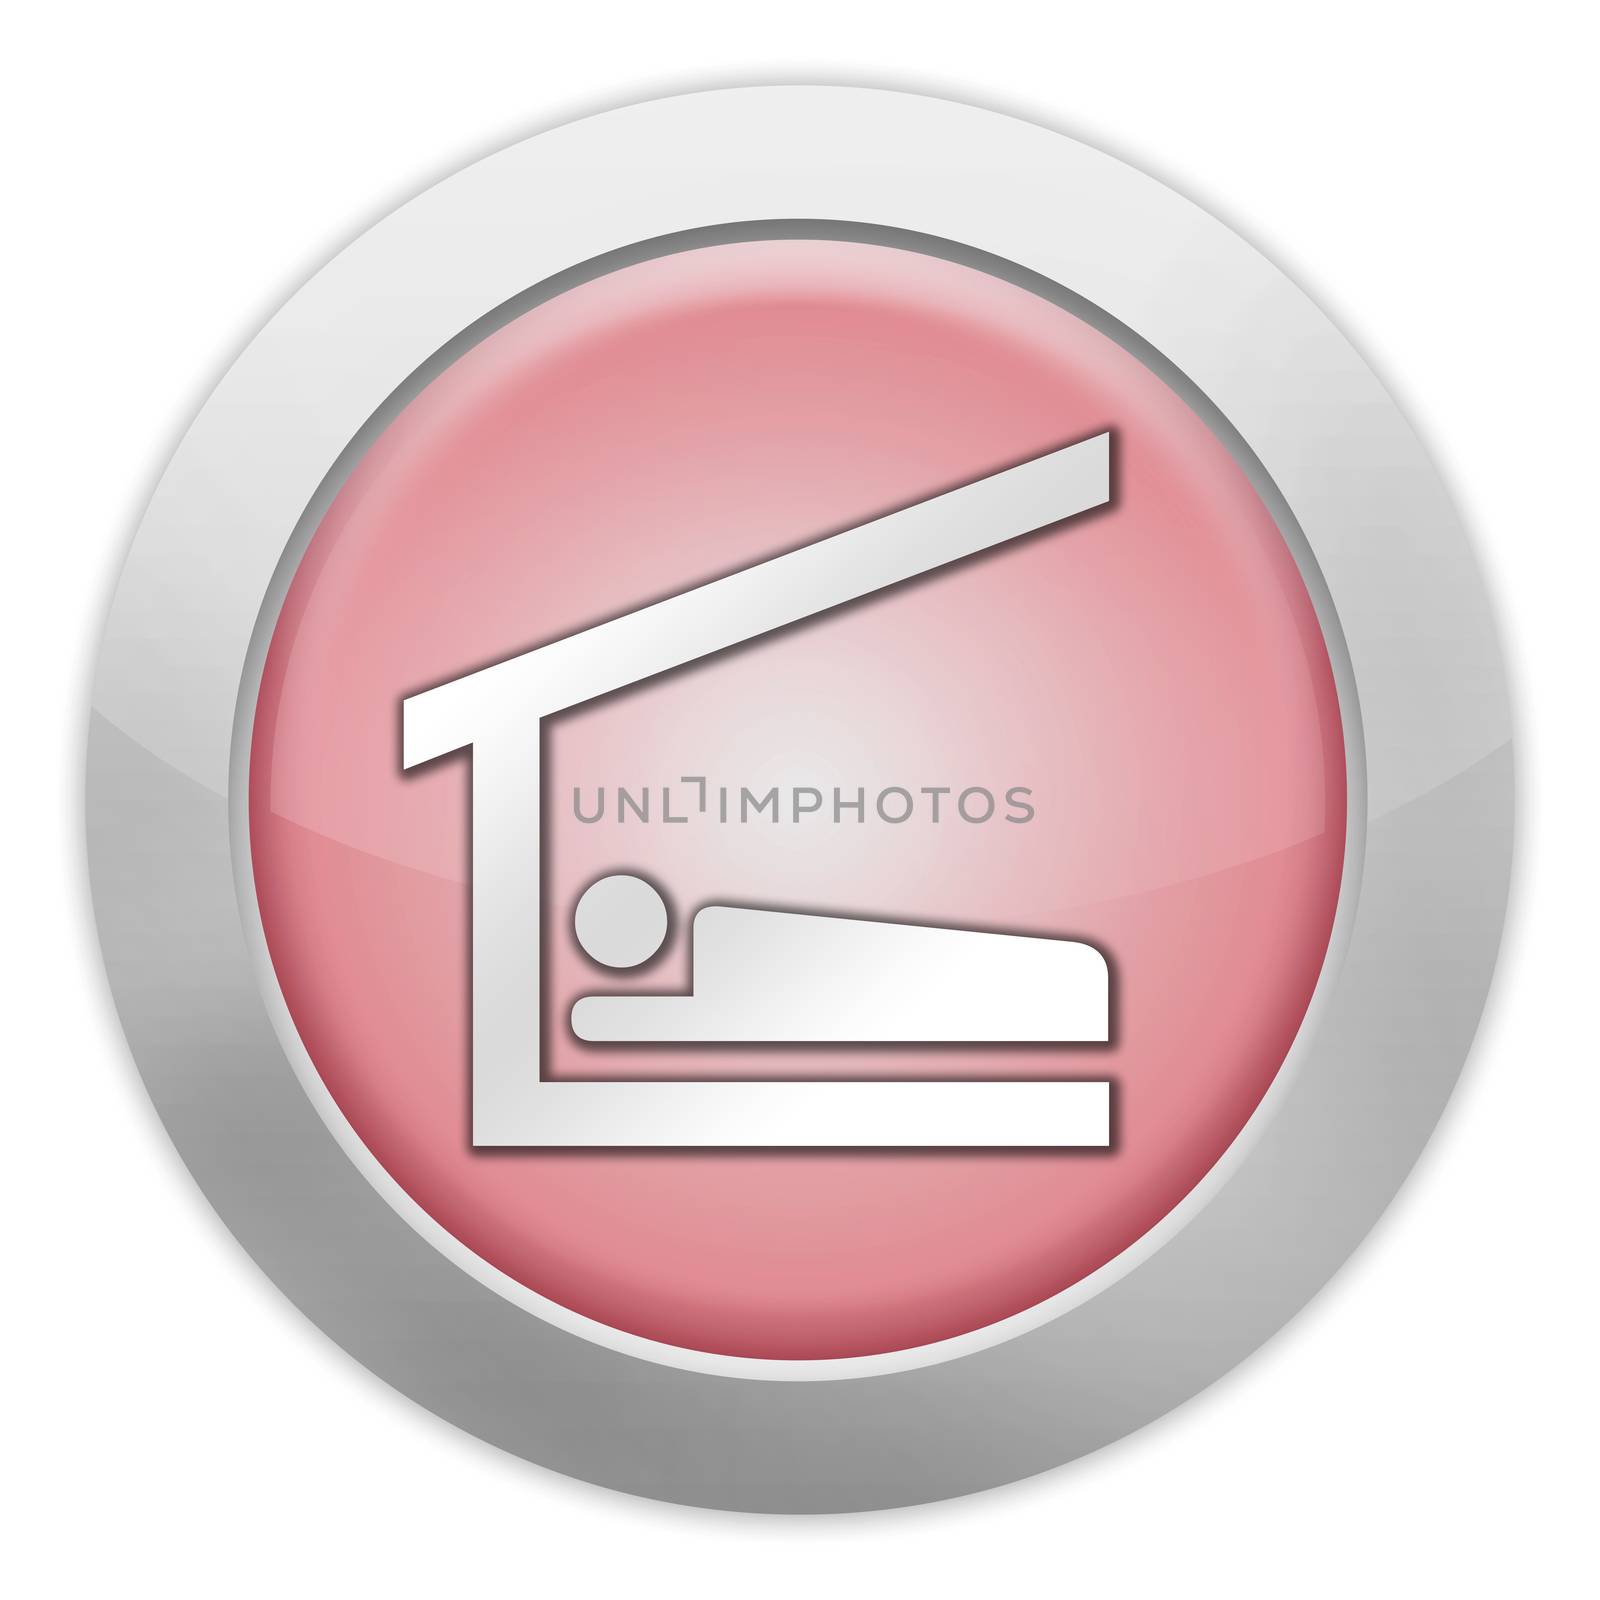 Icon, Button, Pictogram Sleeping Shelter by mindscanner